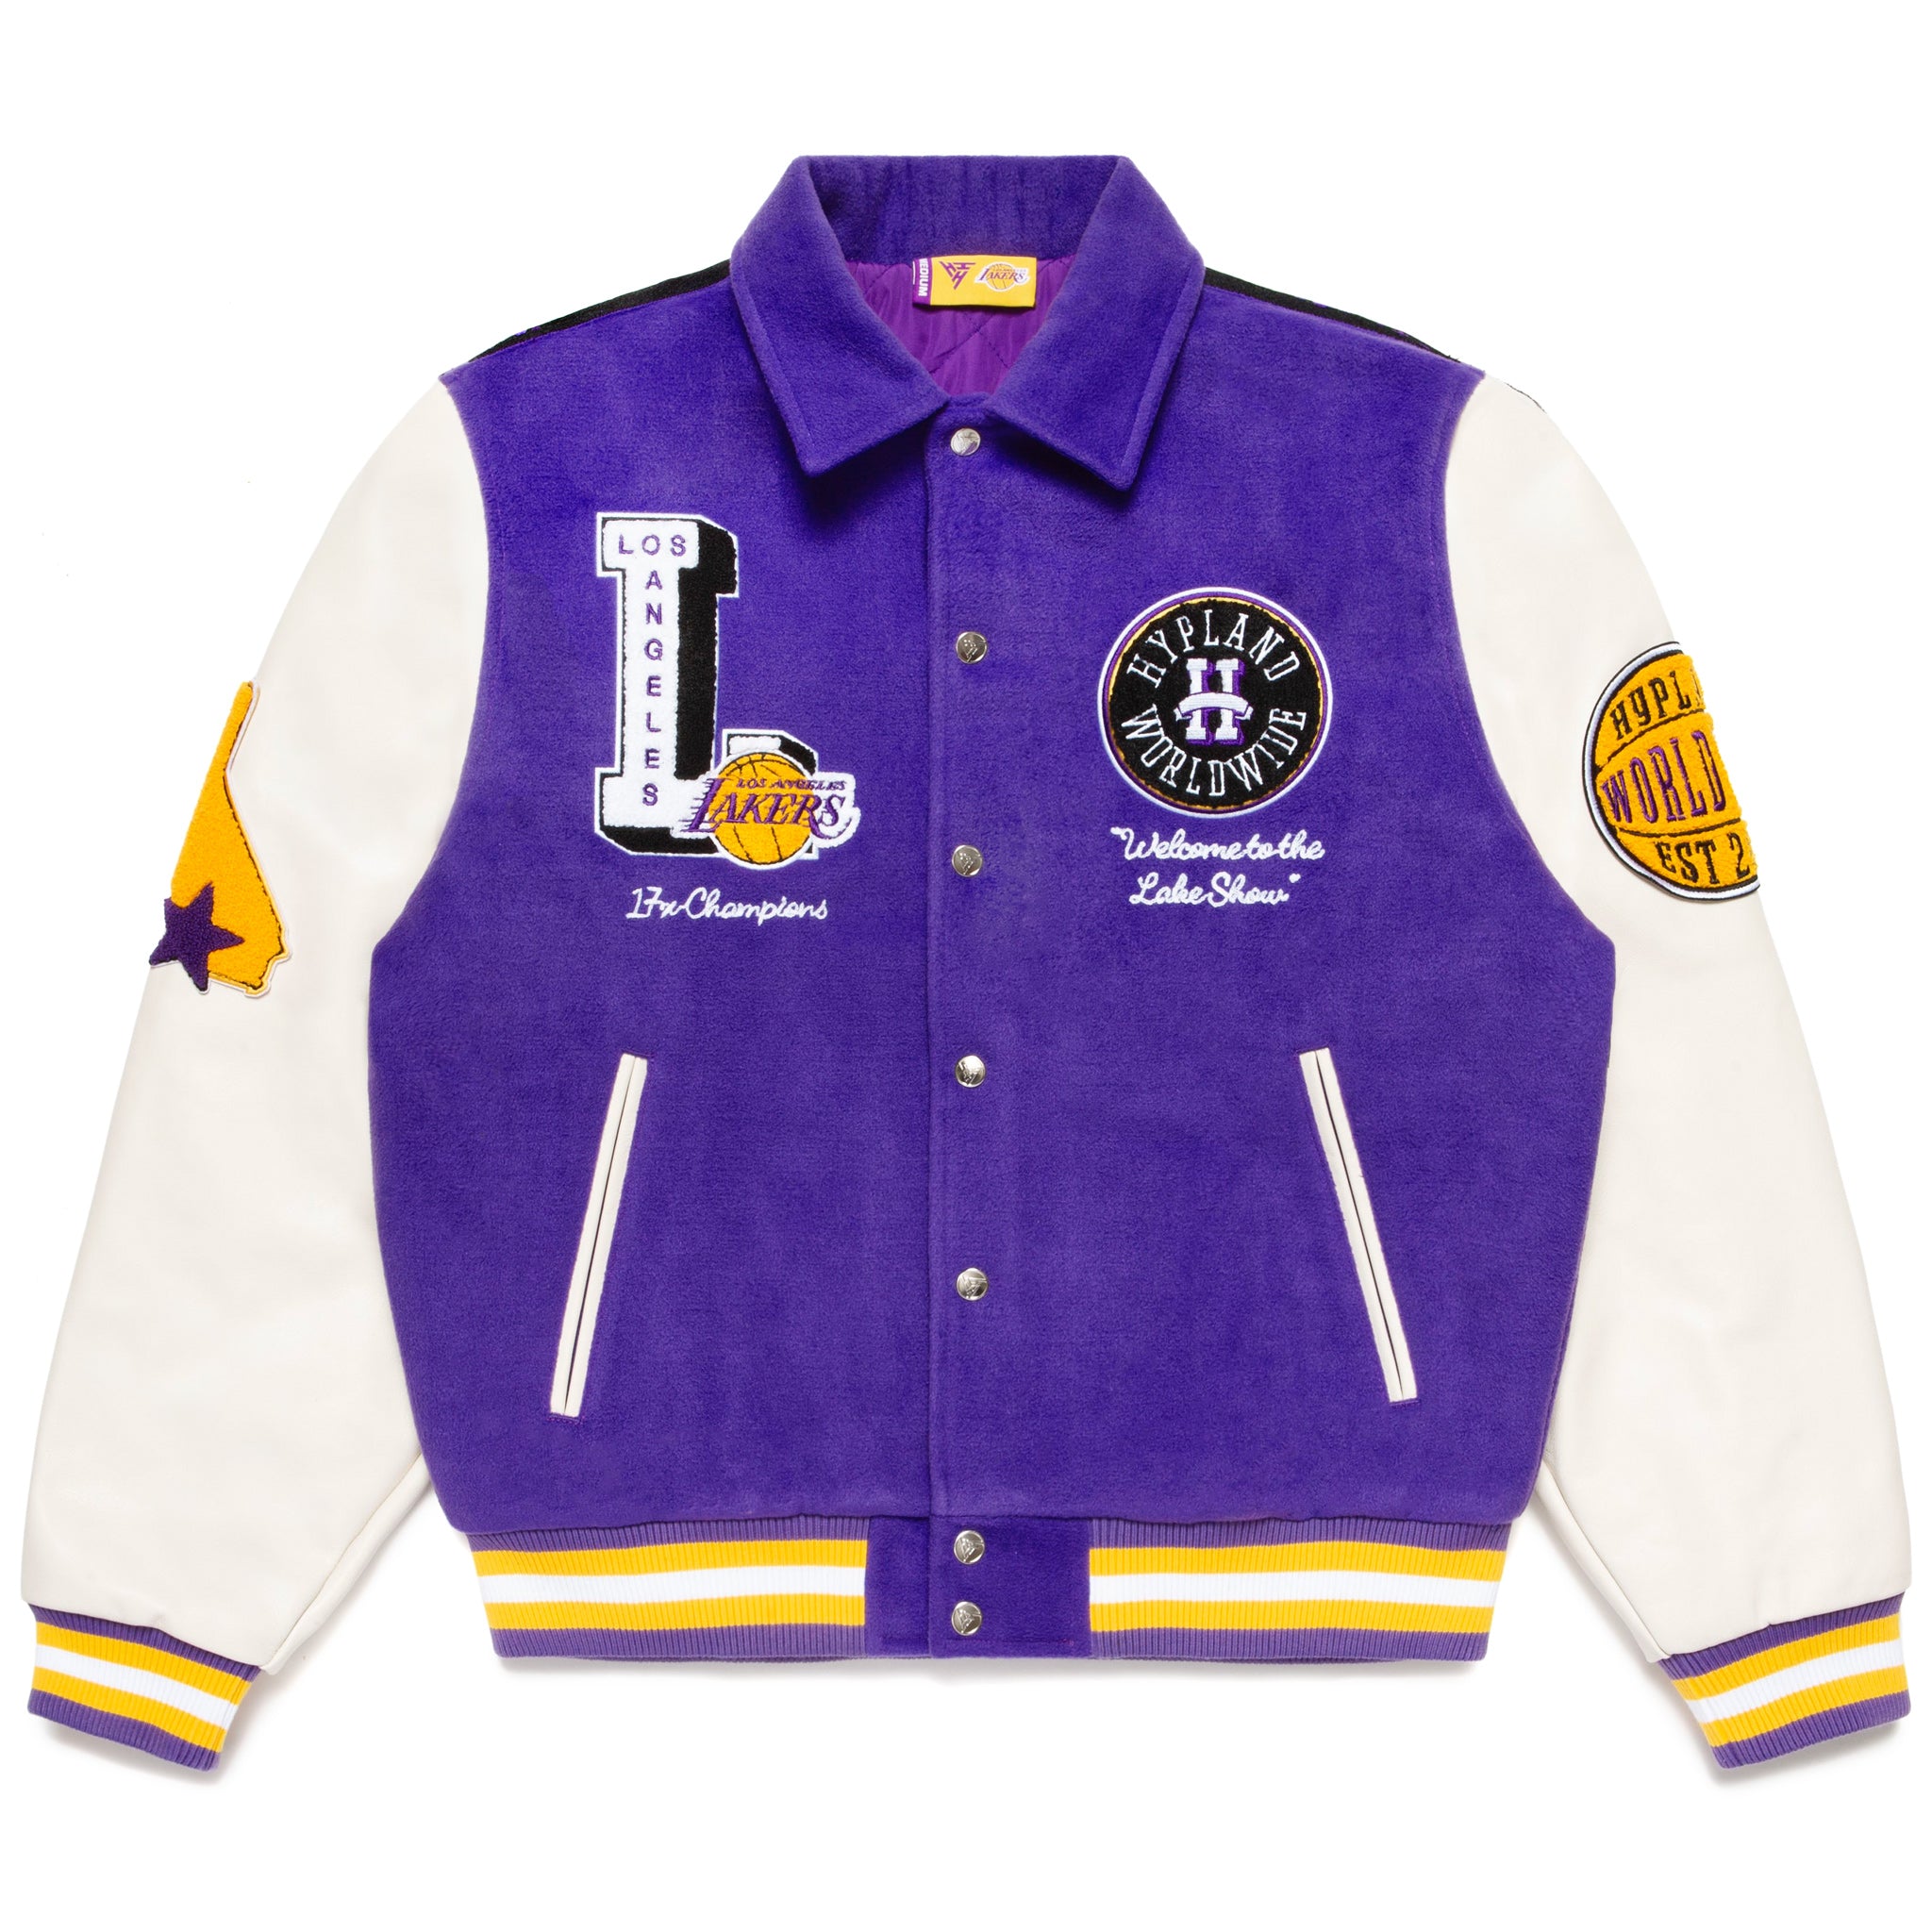 Yellow Los Angeles Lakers NBA Jackets for sale